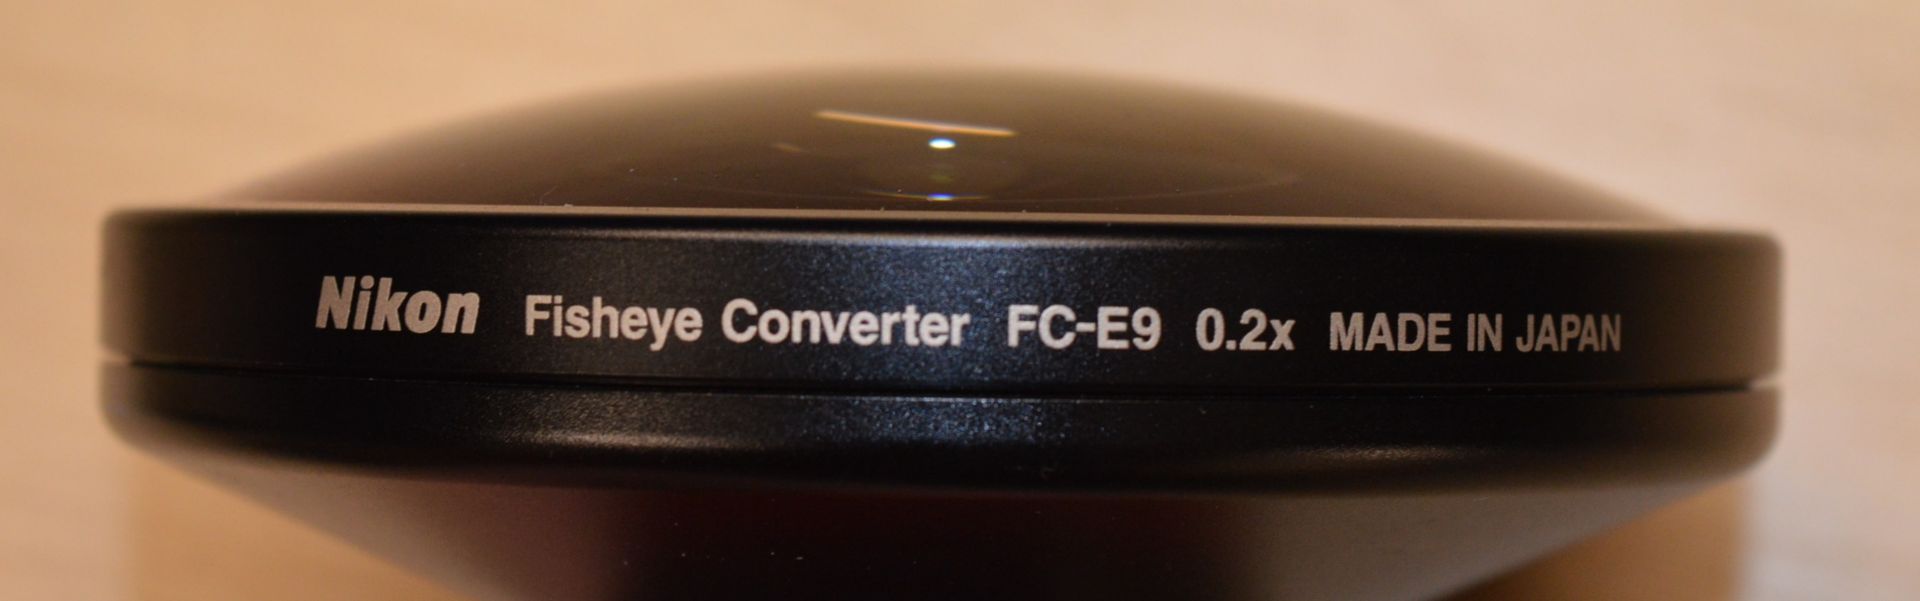 1 x Nikon Fisheye Camera Converter Lens - Model FC-E9 0.2X - With Protection Bag and Accessories - - Image 3 of 4